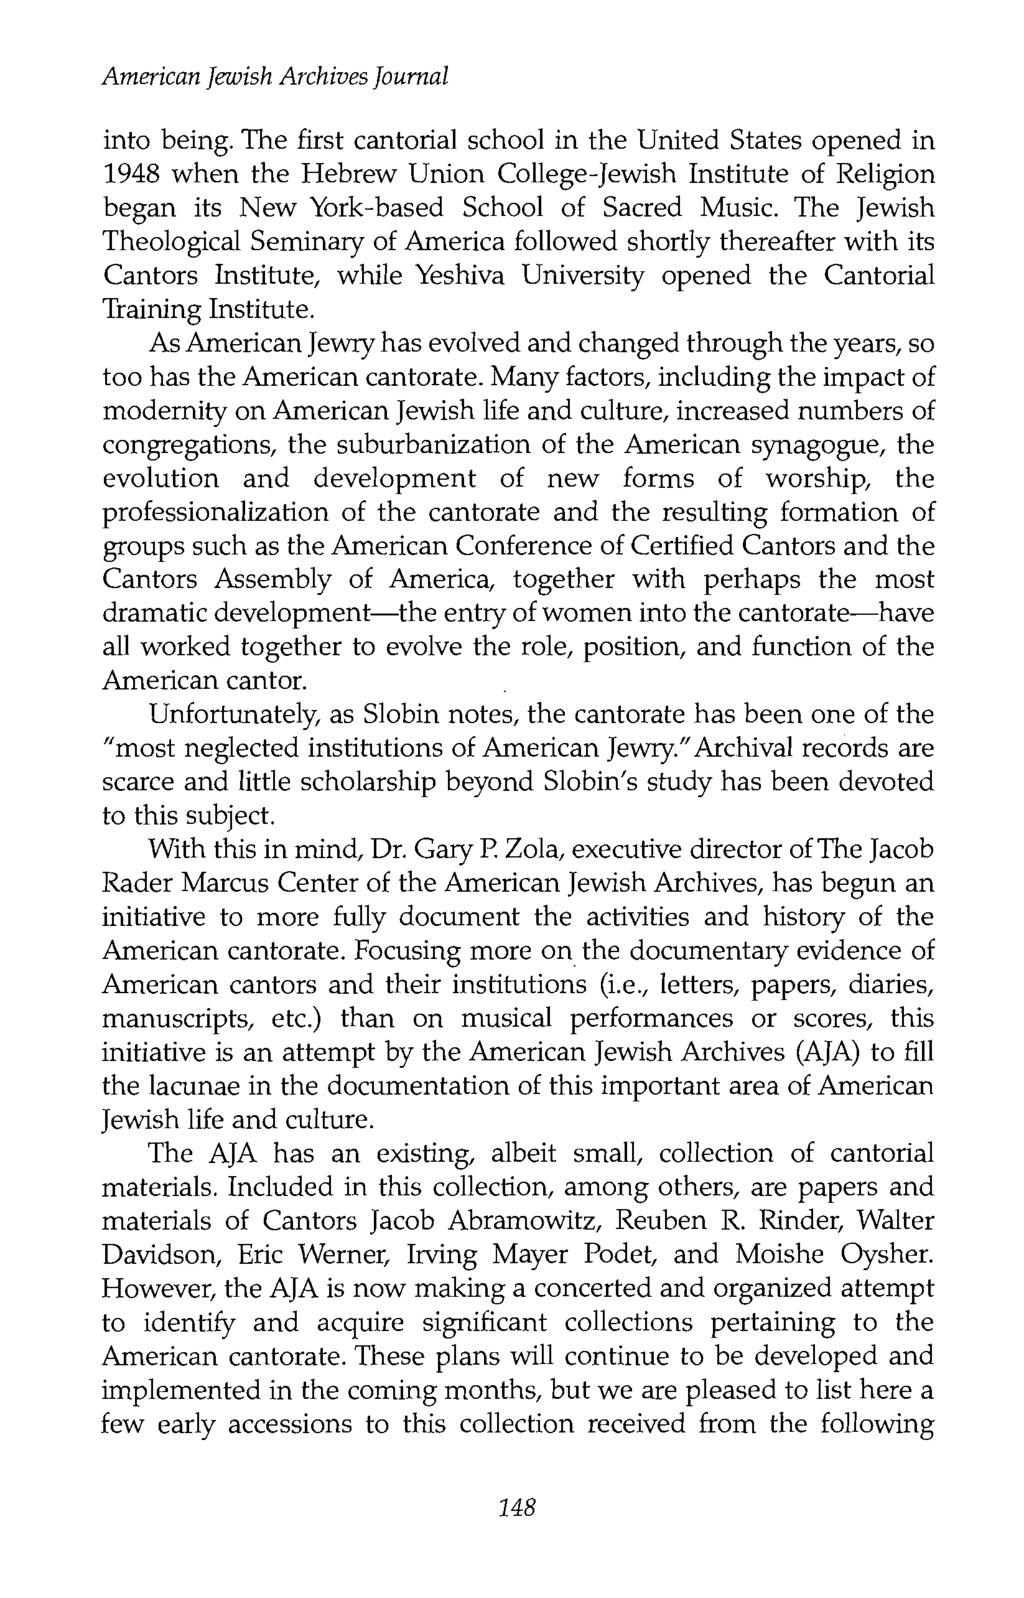 American Jewish Archives Journal into being.